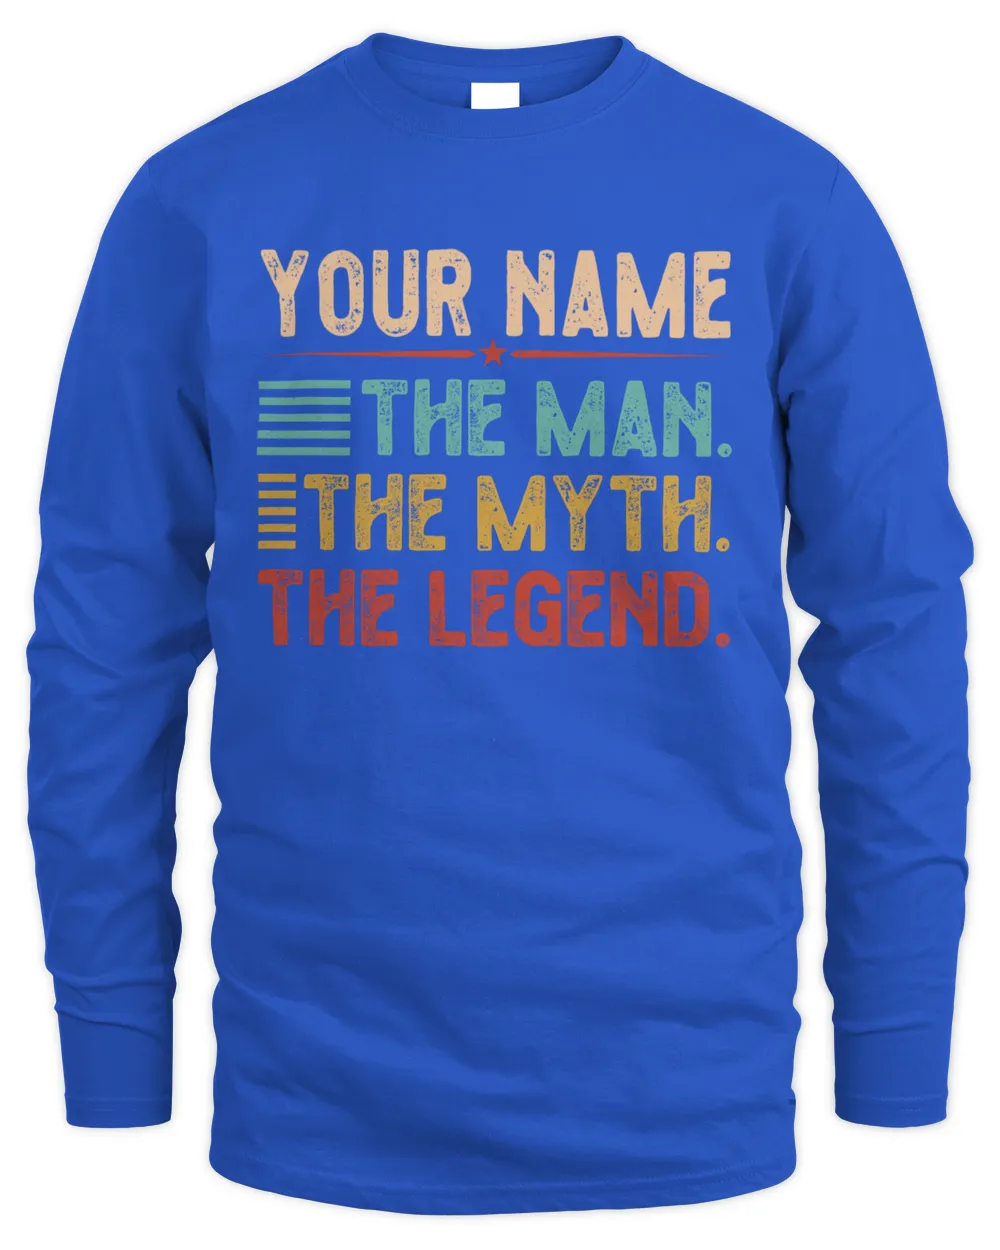 YOUR NAME. The Man. The Myth. The Legend. Great personalised T-Shirts